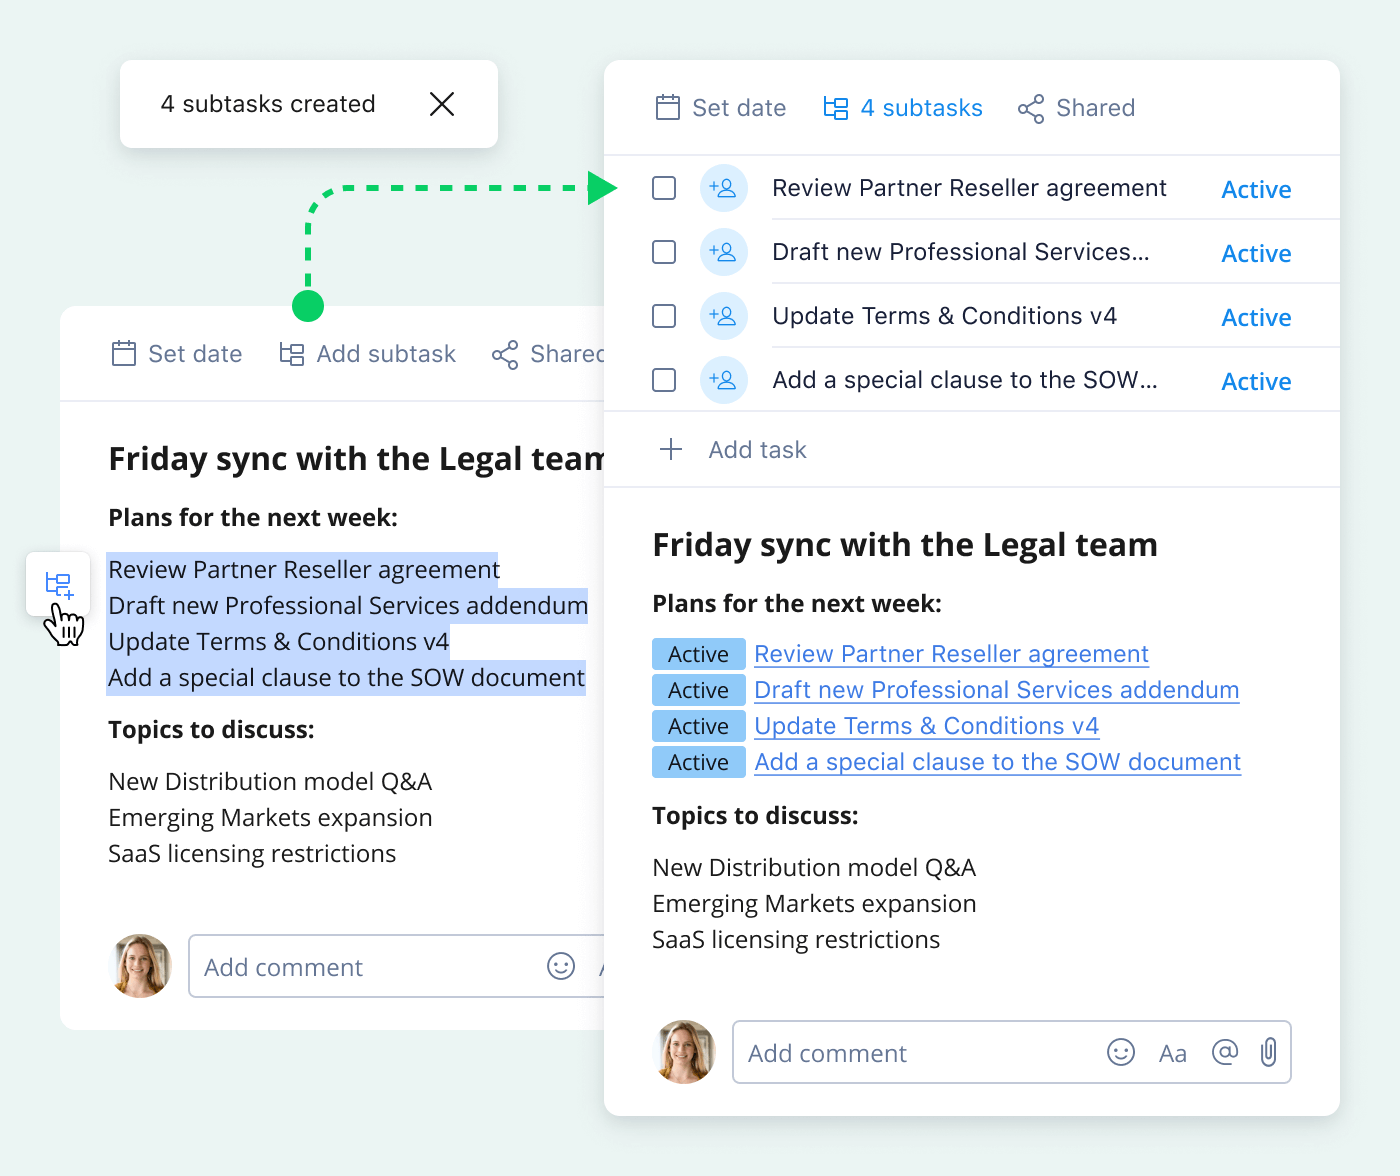 Building Actionable Futures With Wrike’s AI Subtask Creation for Meetings 2